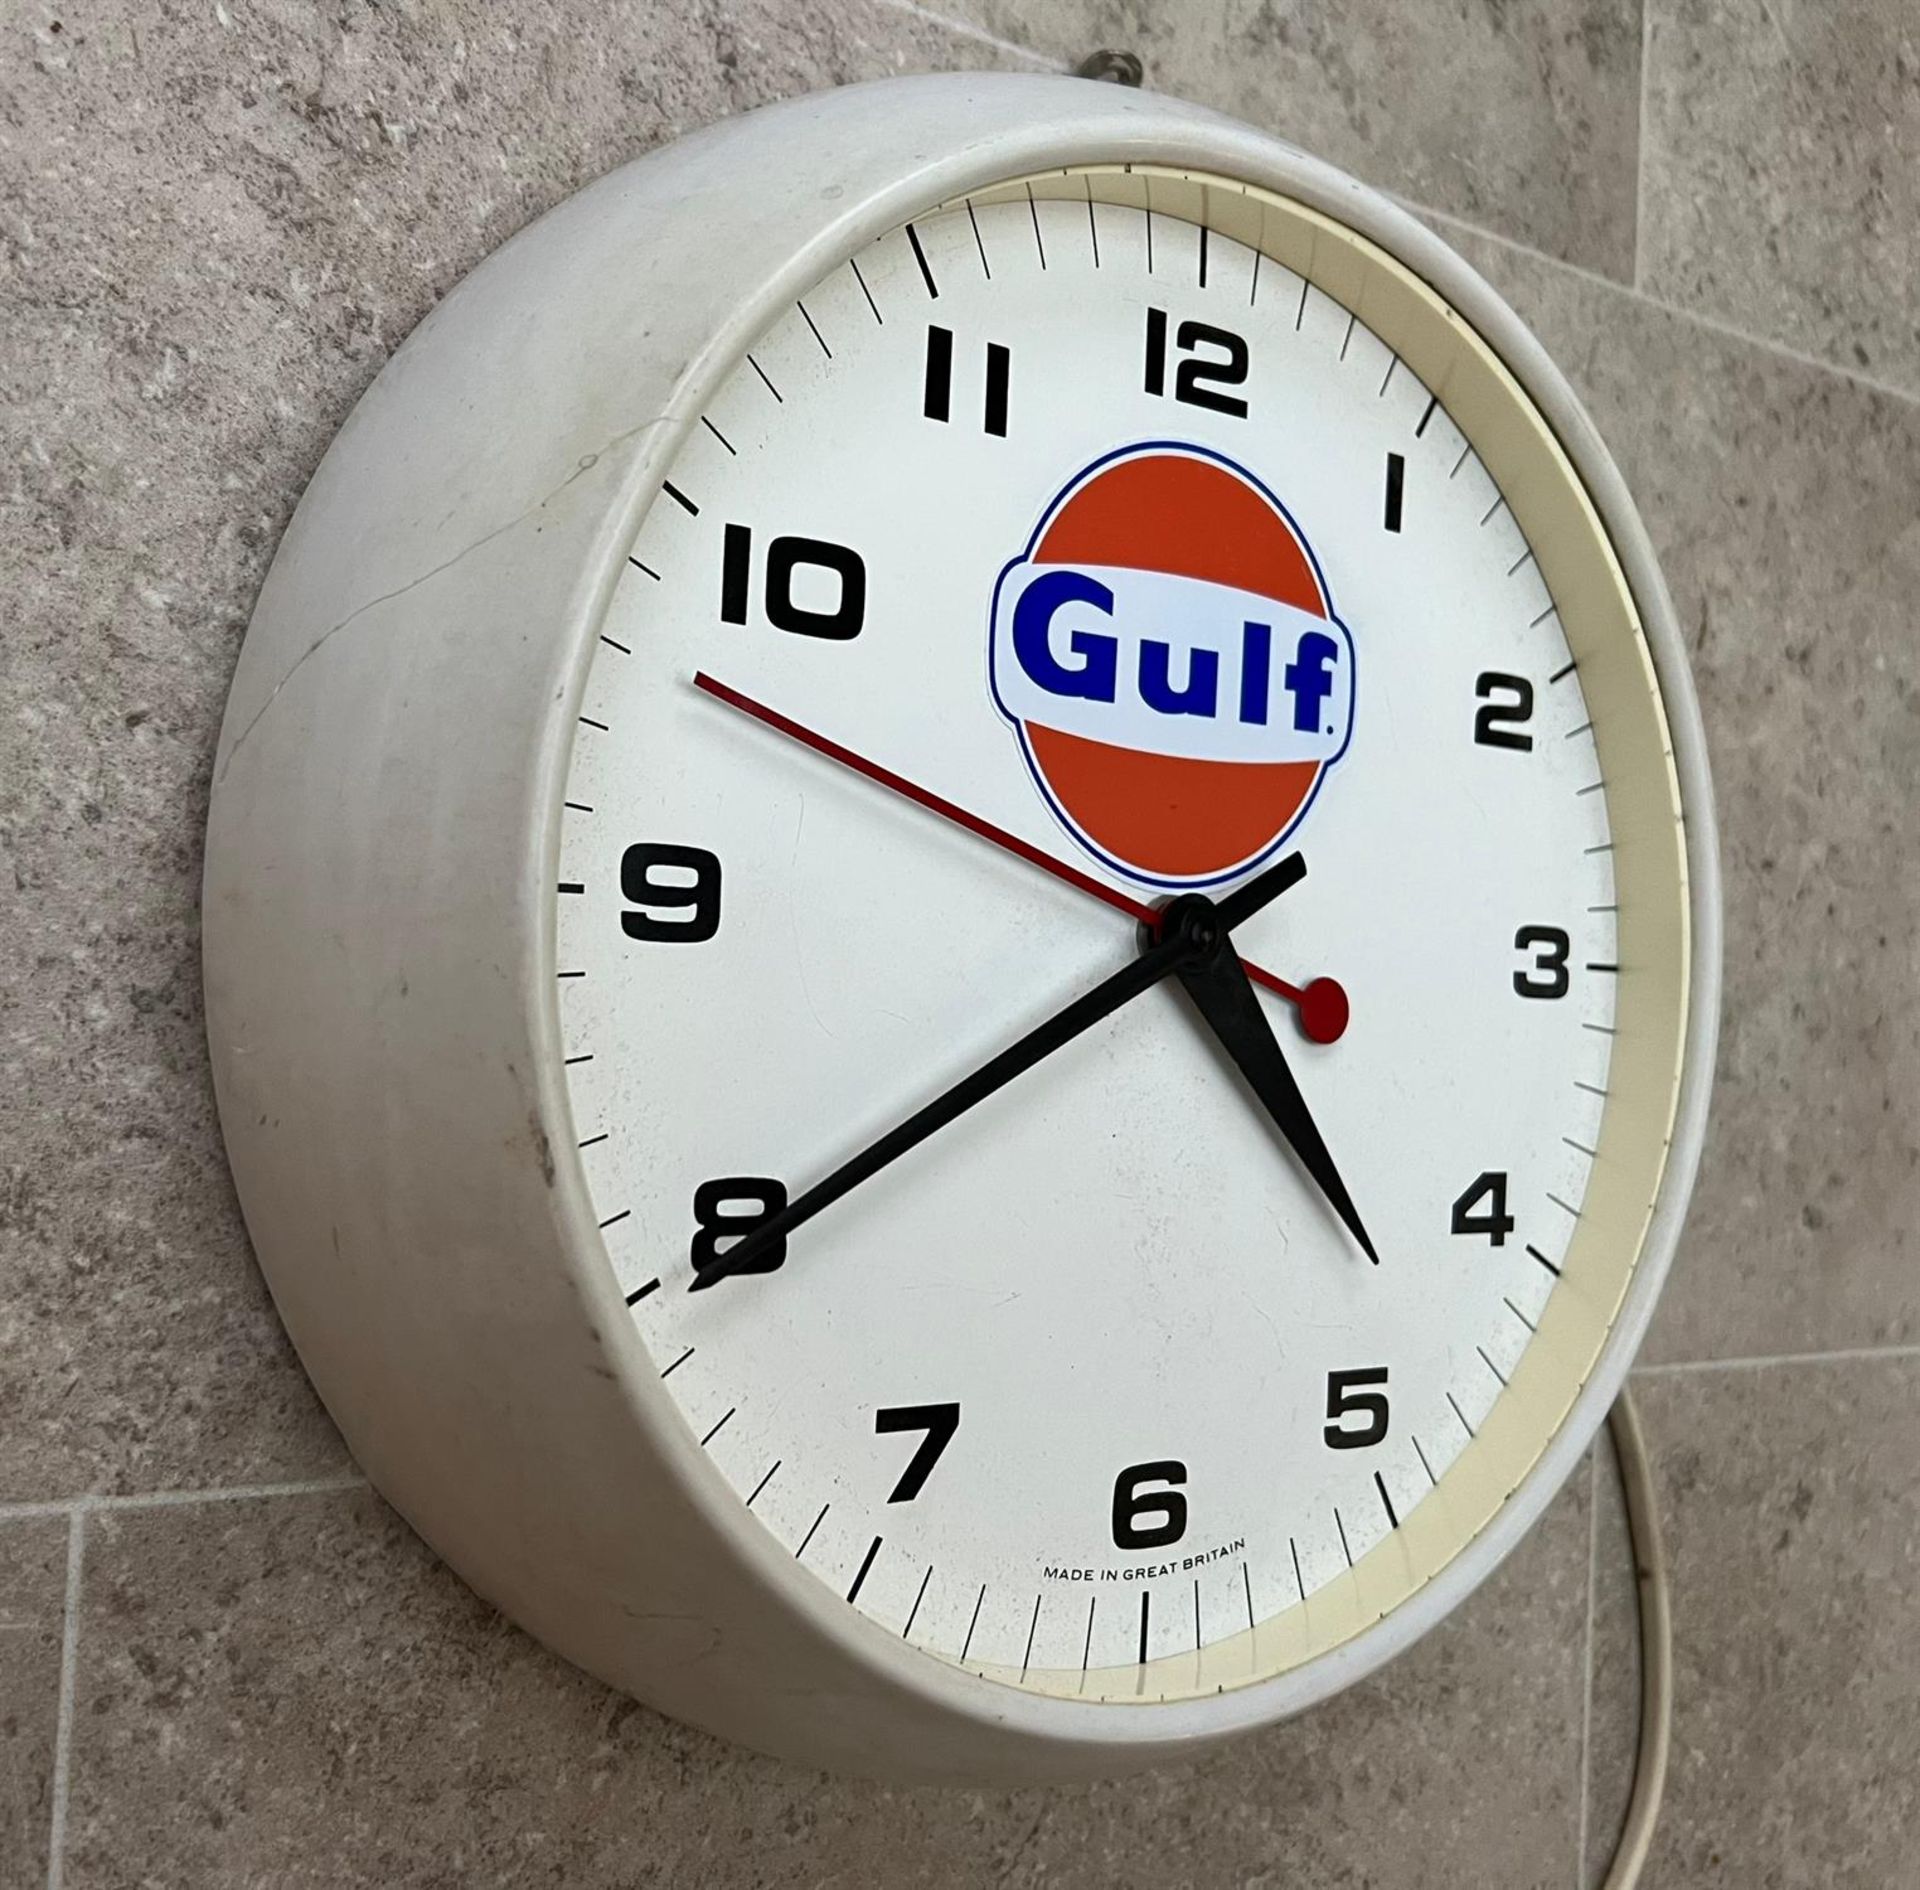 An Original Smiths 9" Gulf-Themed Wall Clock c.1970s - Image 5 of 8